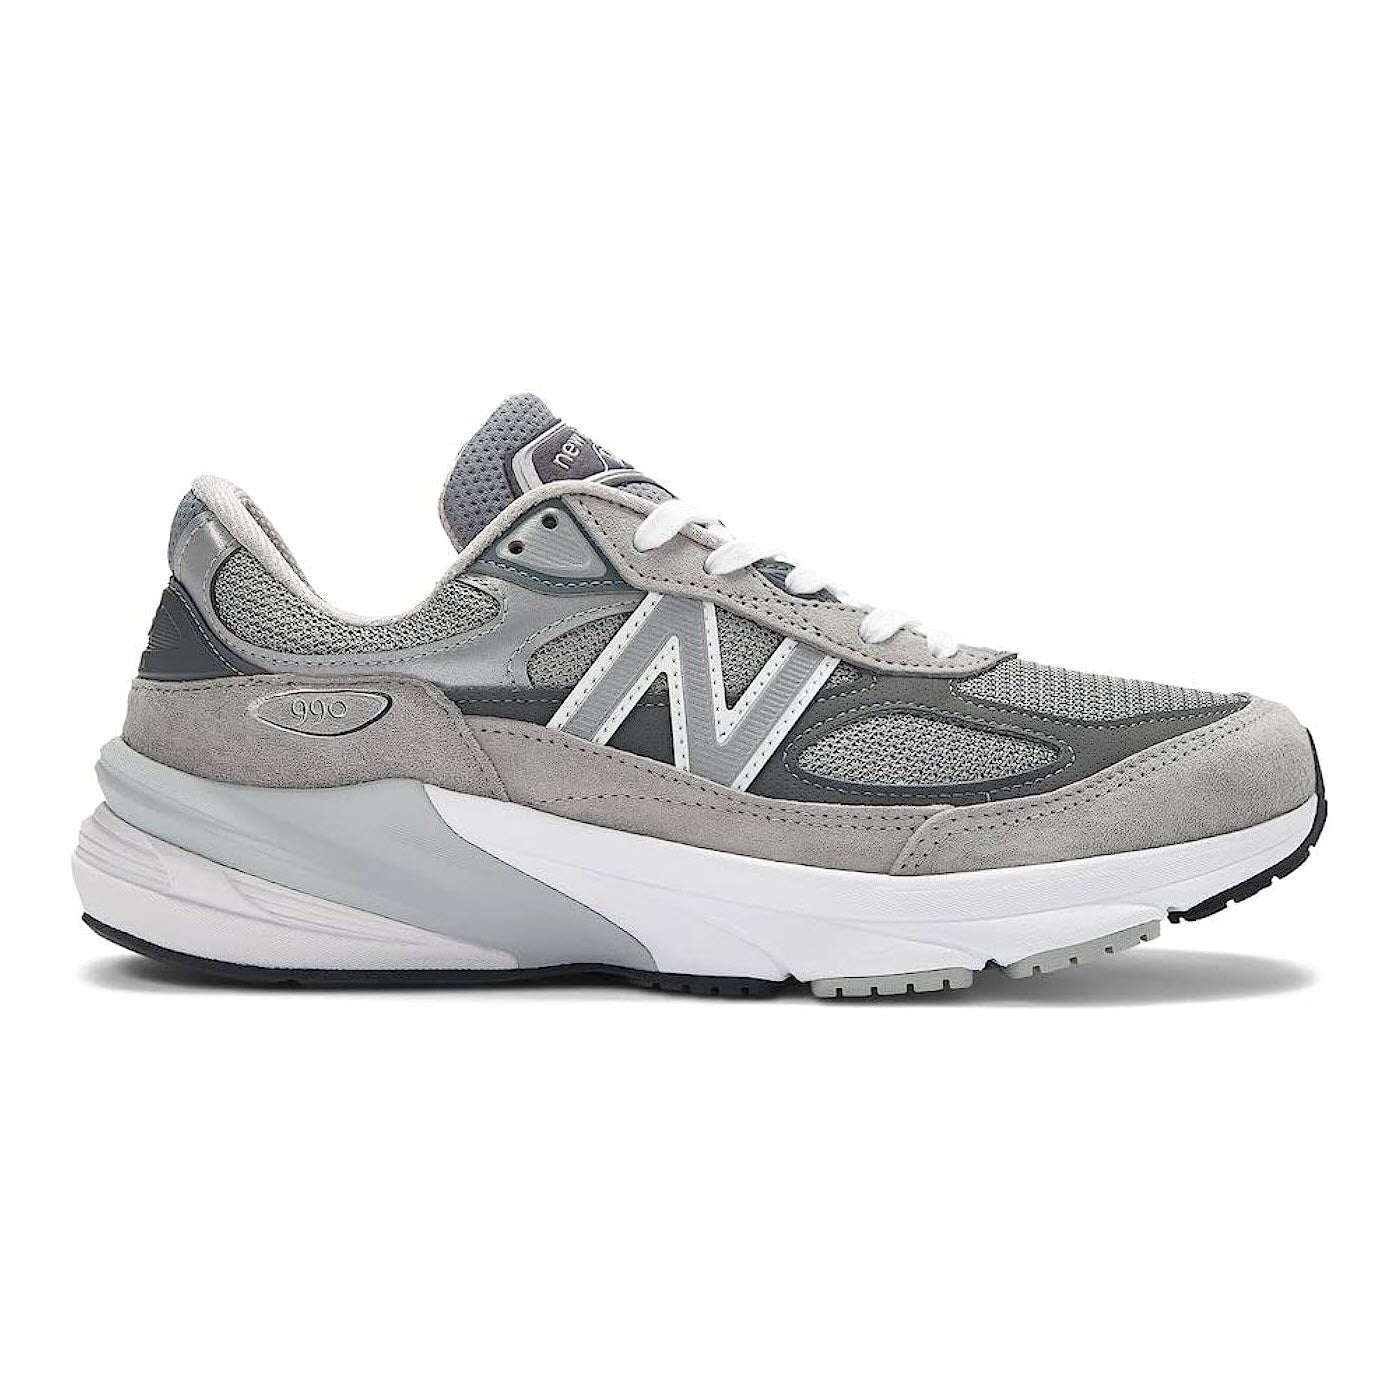 A New Balance 990 V6 Grey running shoe with a visible "n" logo on the side.